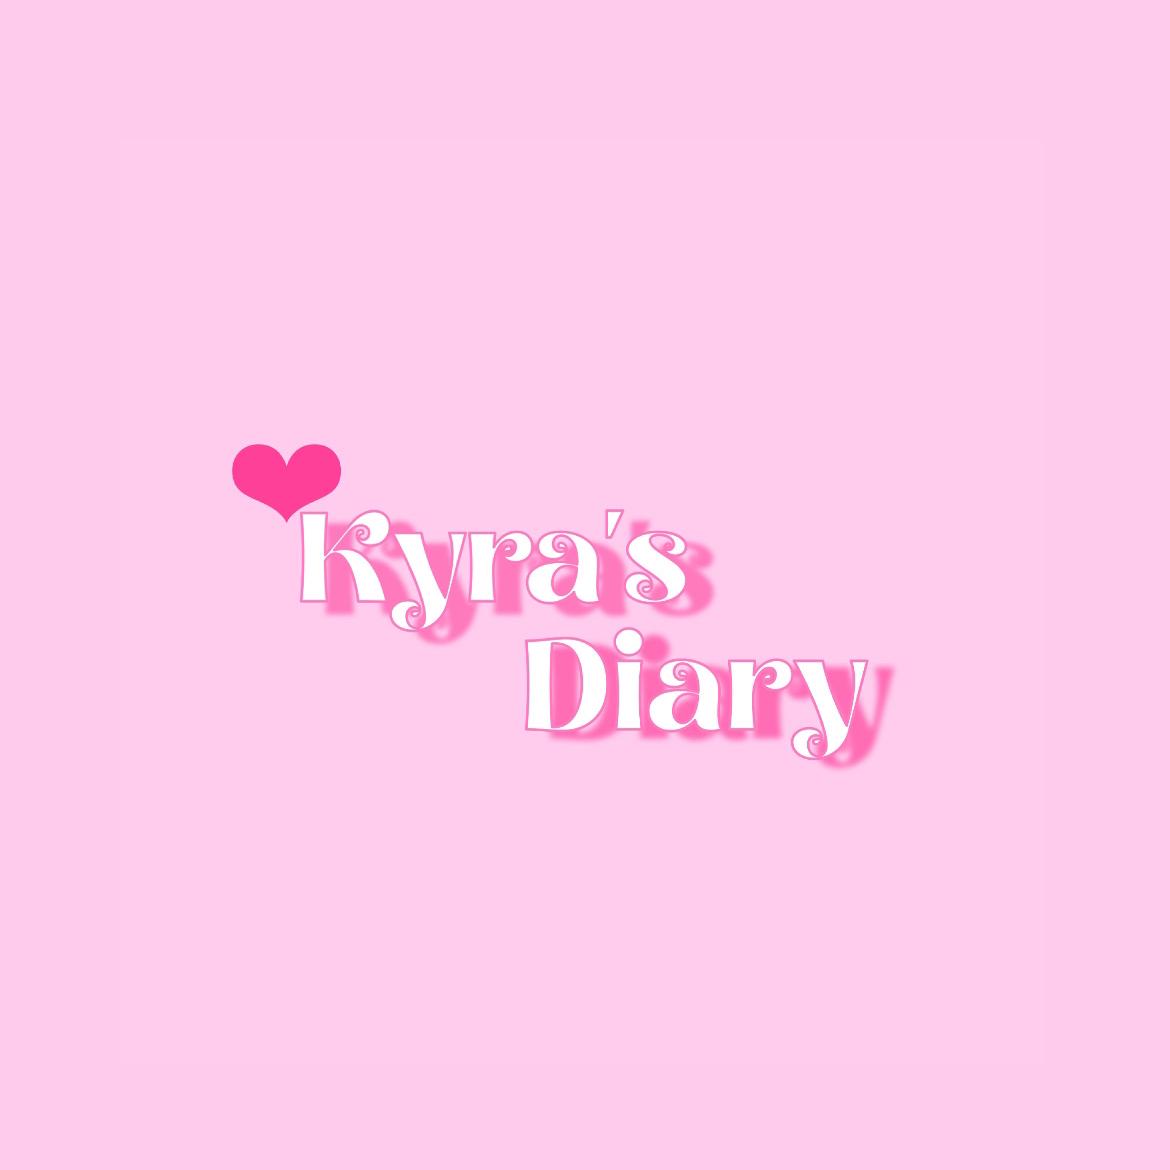 Kyra's images